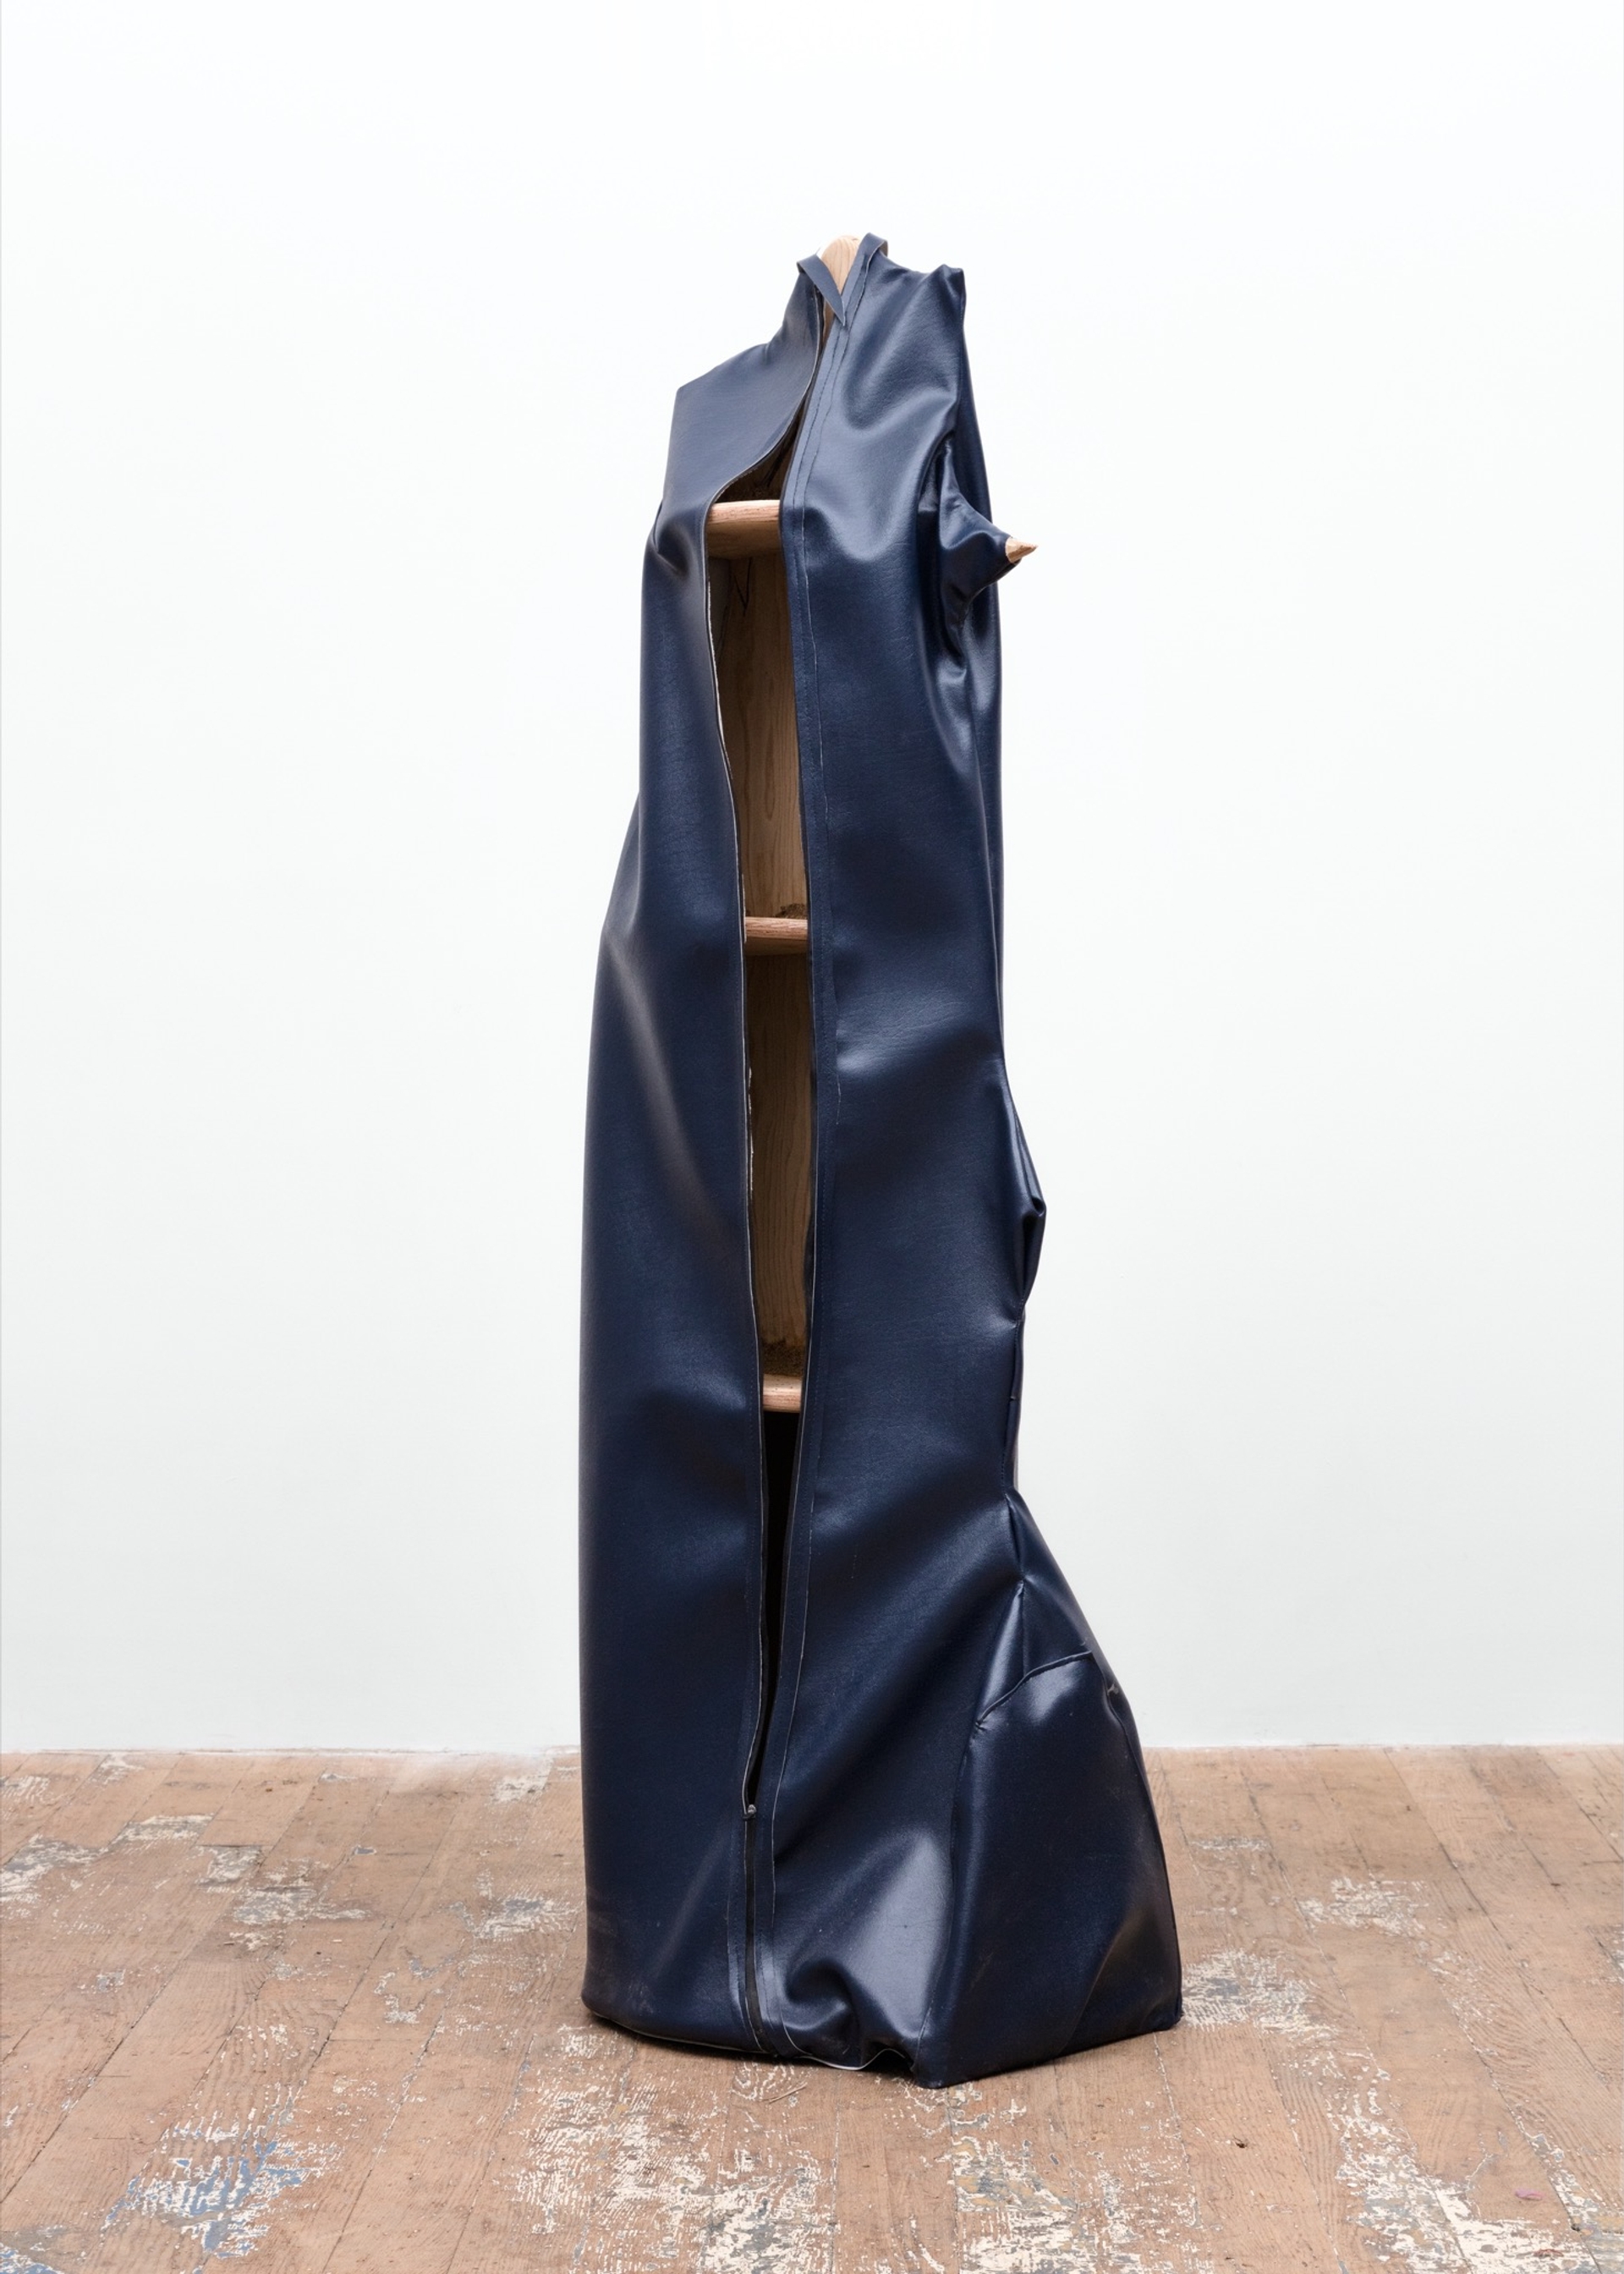 Jessi Reaves, Rules Around Here (Waterproof Shelf), 2016. Plywood, vinyl, zippers, marker 64 × 29 × 20 in. (162.56 × 73.66 × 50.80 cm) Courtesy the artist, Herald St, London and Bridget Donahue NYC. Photo: Andy Keate.